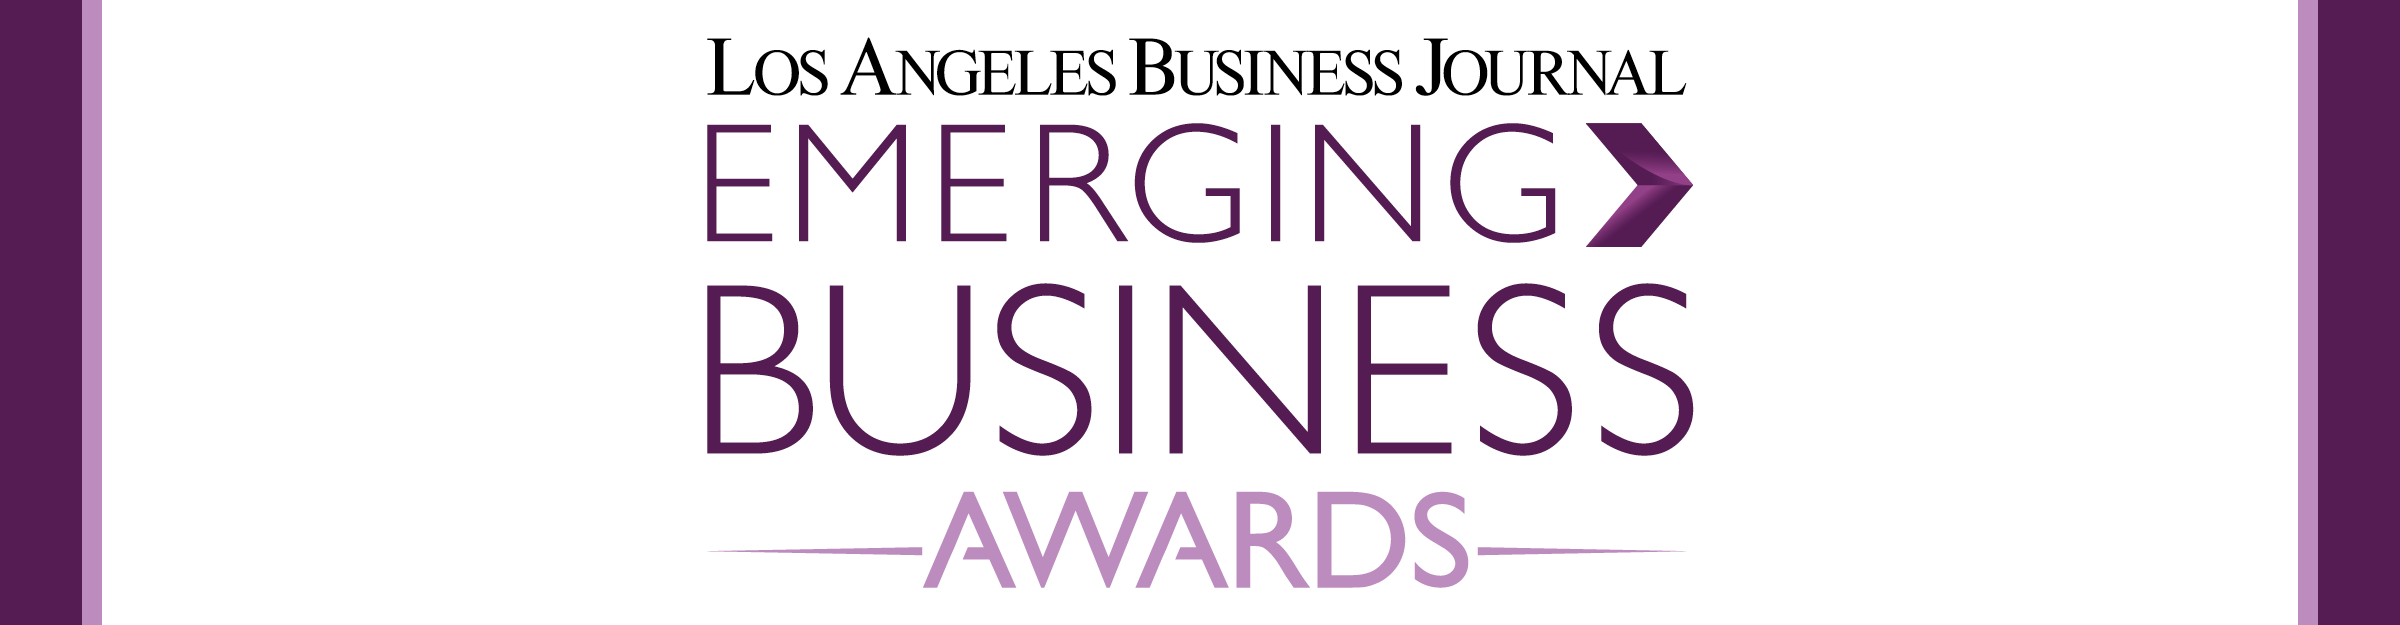 Los Angeles Business Journal NAME OF EVENT Awards Event Banner